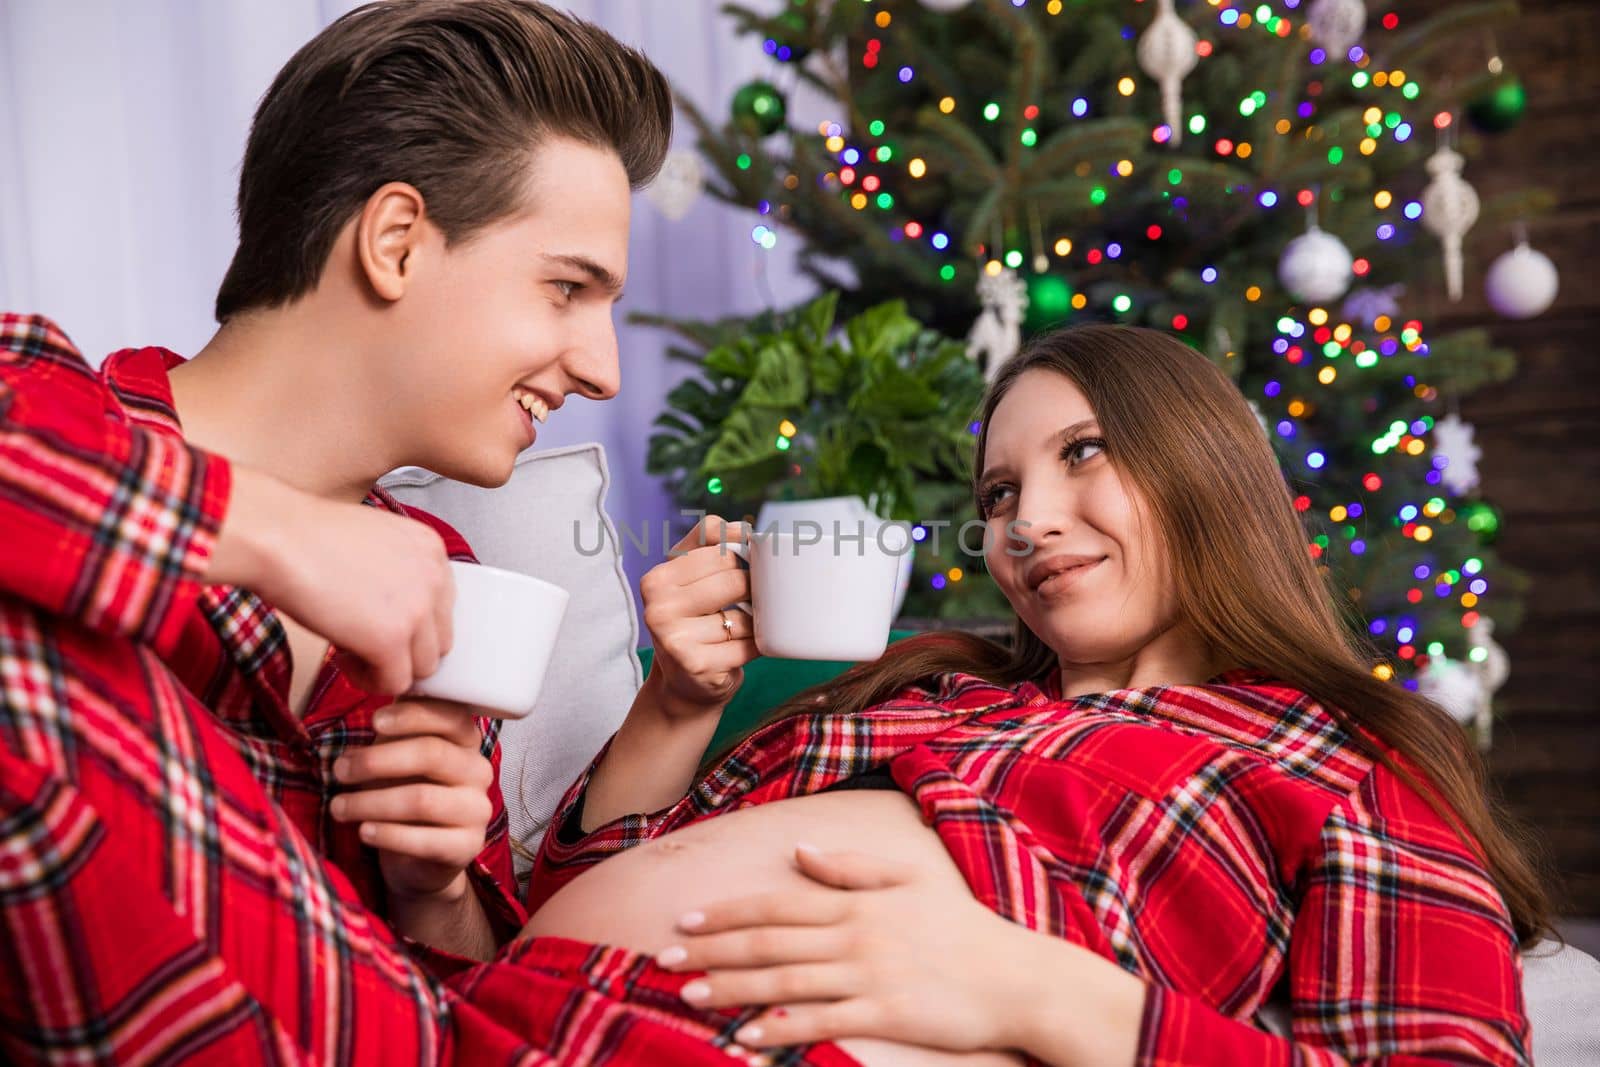 A woman in advanced pregnancy shows off her exposed pregnant belly while resting her legs on her partner's knees. The couple looks into each other's eyes and holds white cups in their hands.